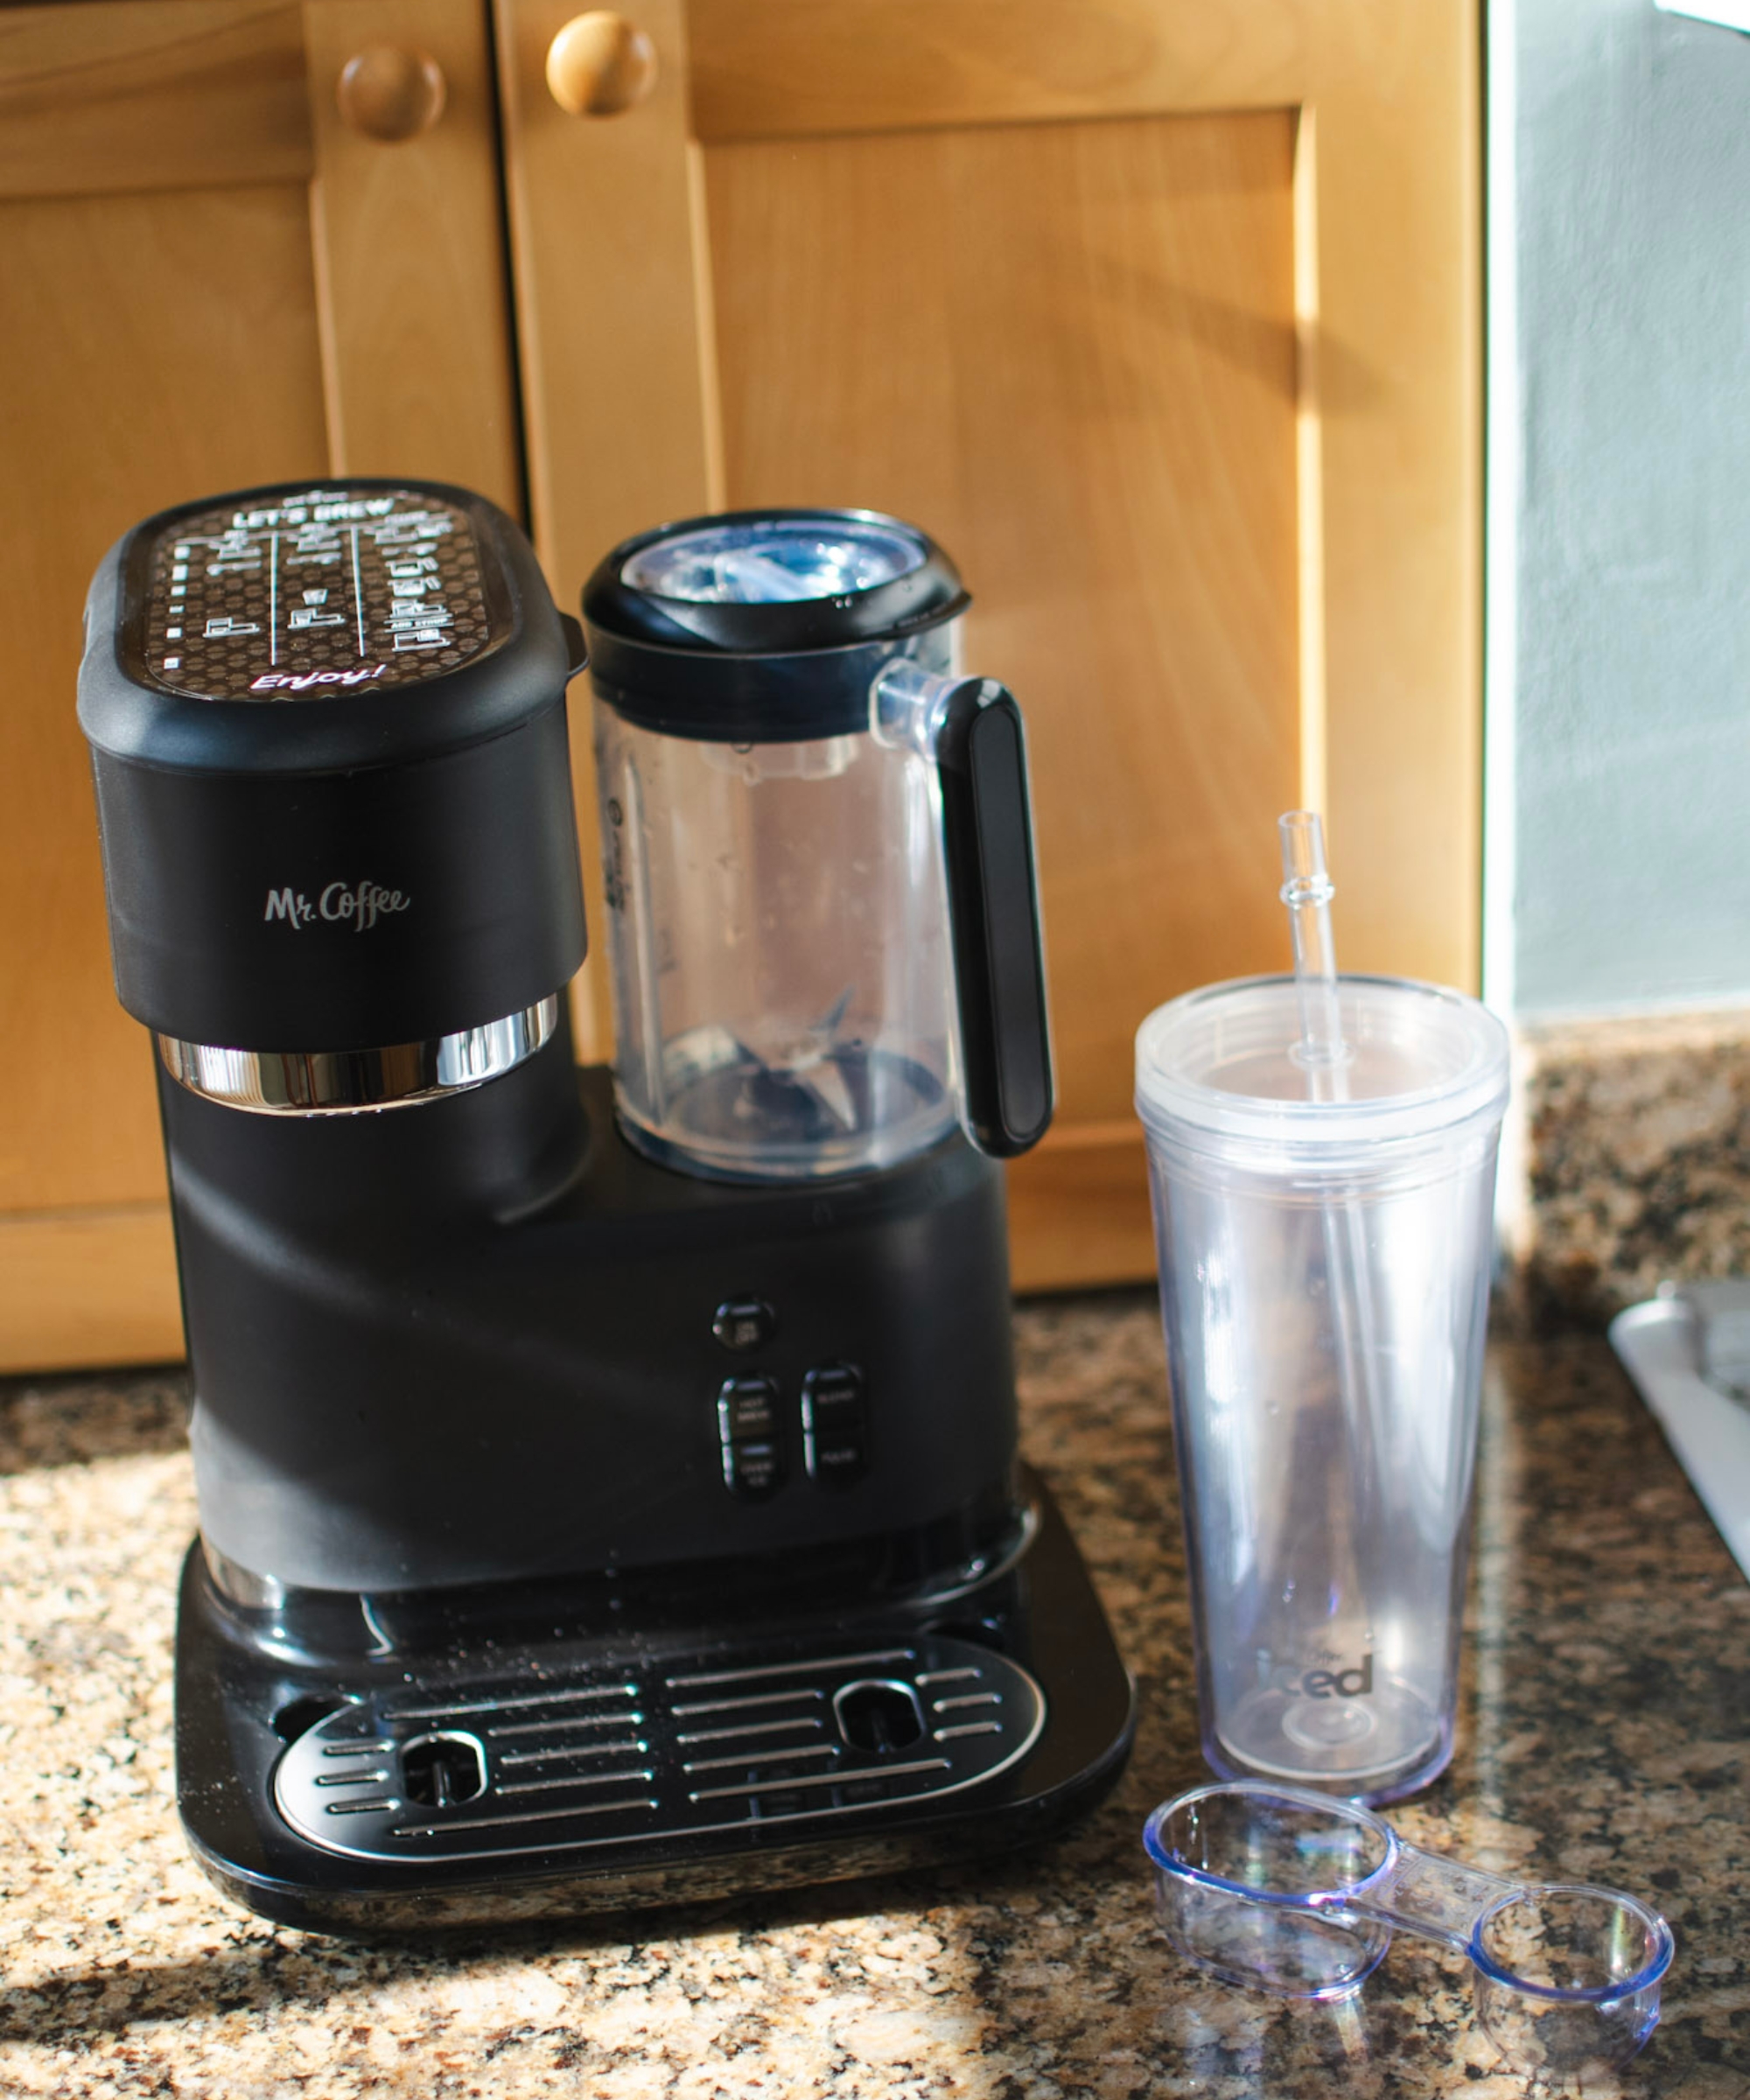 Mr Coffee Frappe Maker Unboxing, Review and How to Use 